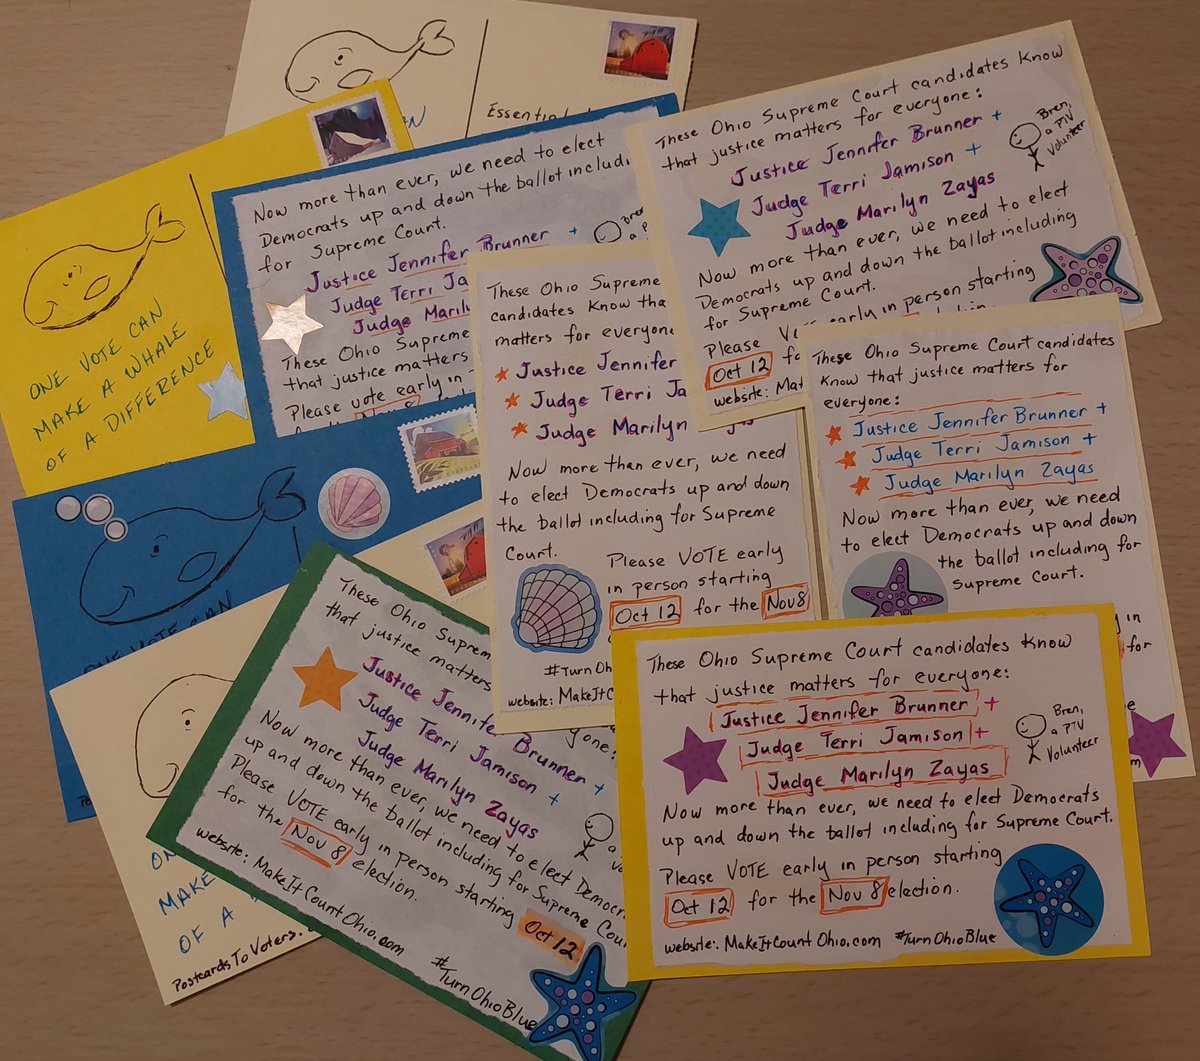 Back to Ohio with 10 more #PostcardsToVoters for Supreme Court candidates: Justice Jennifer Brunner, Judge Terri Jamison, and Judge Marilyn Zayas.  These awesome Democrats know that justice matters for everyone. 

#DemocracIsOnTheBallot
#TurnOhioBlue